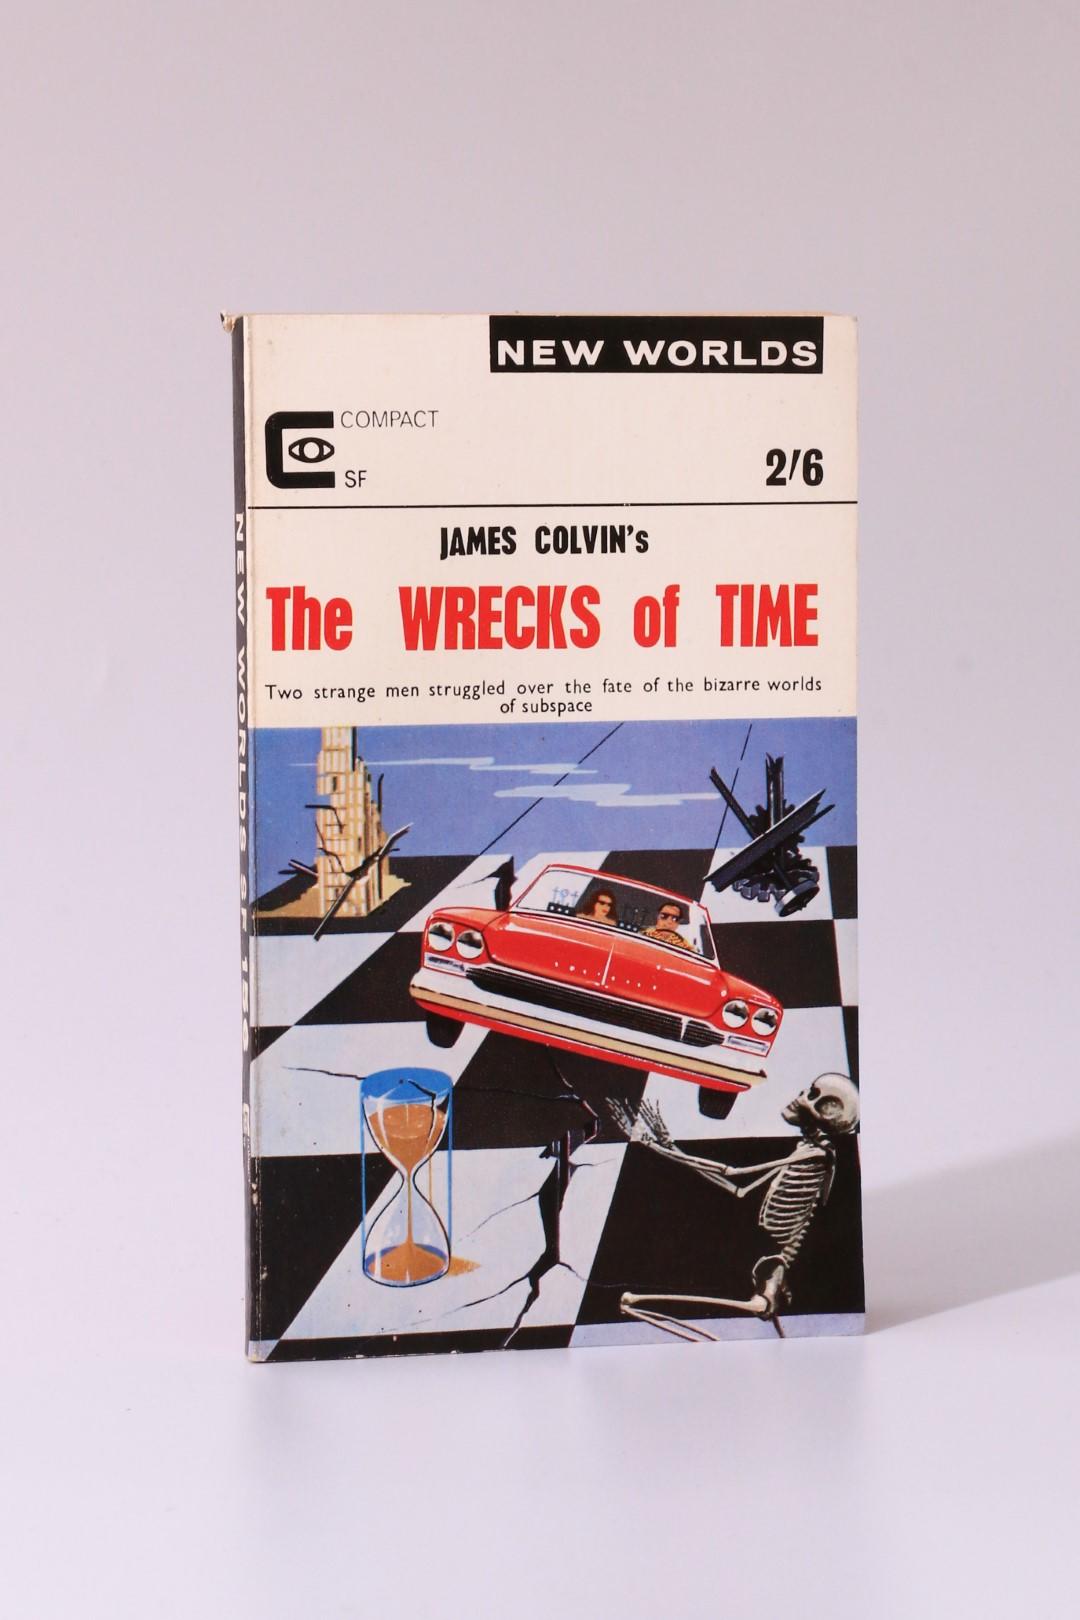 various inc Terry Pratchett - New Worlds: November 1965, Volume 49, Number 156 - Compact SF, 1965, First Edition.